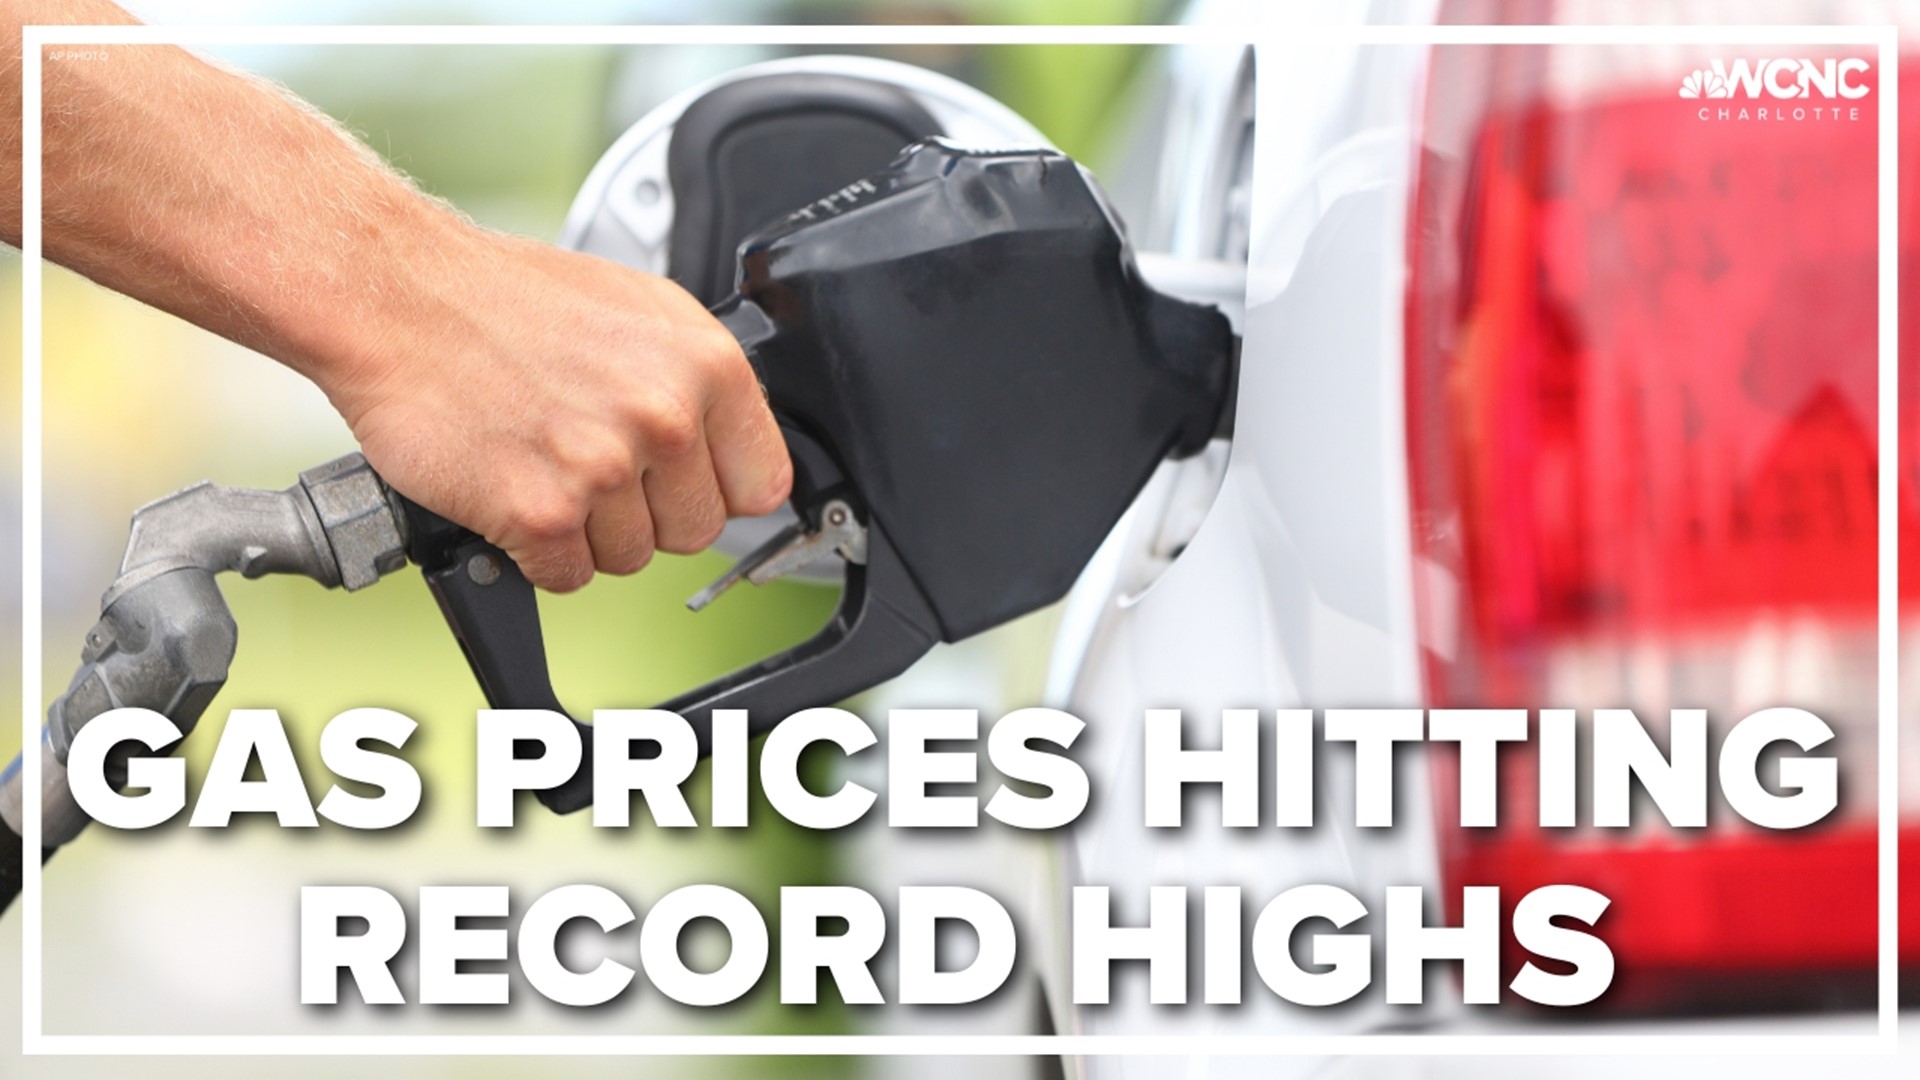 Gas prices keep inching up, and if you were hoping for a little relief at the pump, it doesn't look like it's going to happen anytime soon.